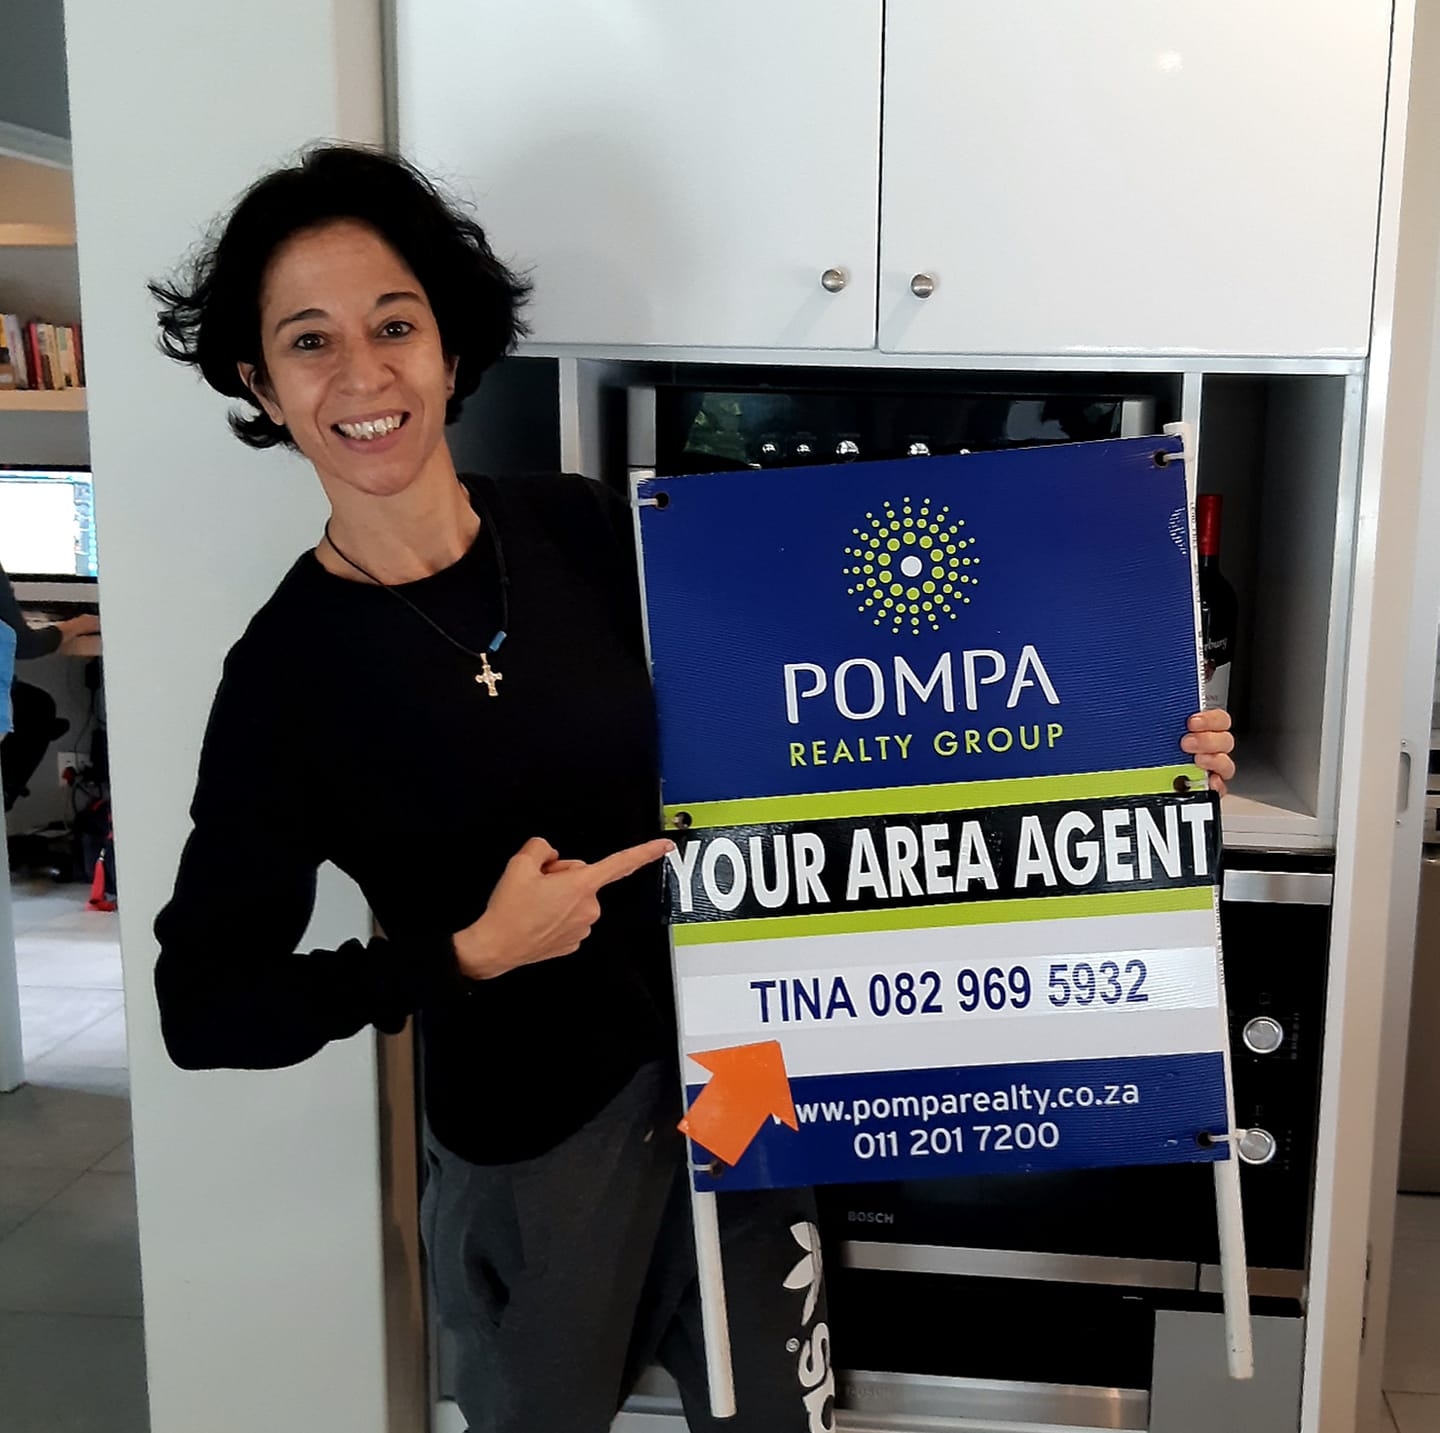 Your area agent